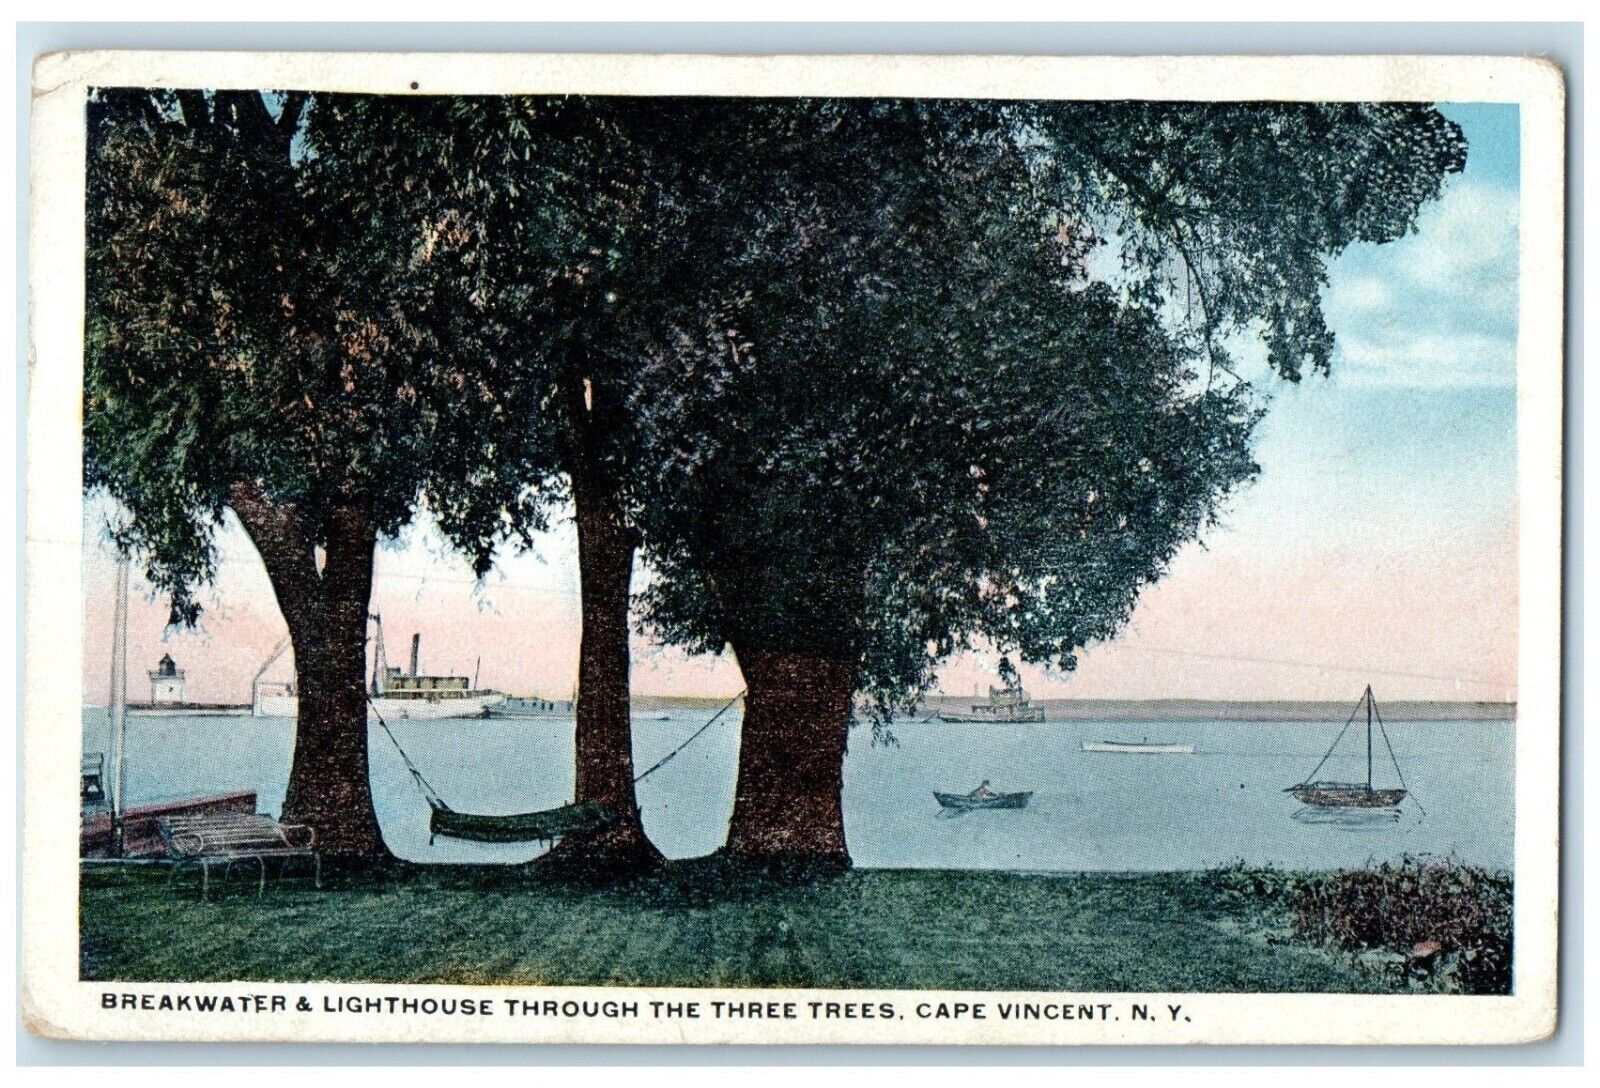 1920 Breakwater Lighthouse Through Three Trees Cape Vincent New York NY Postcard